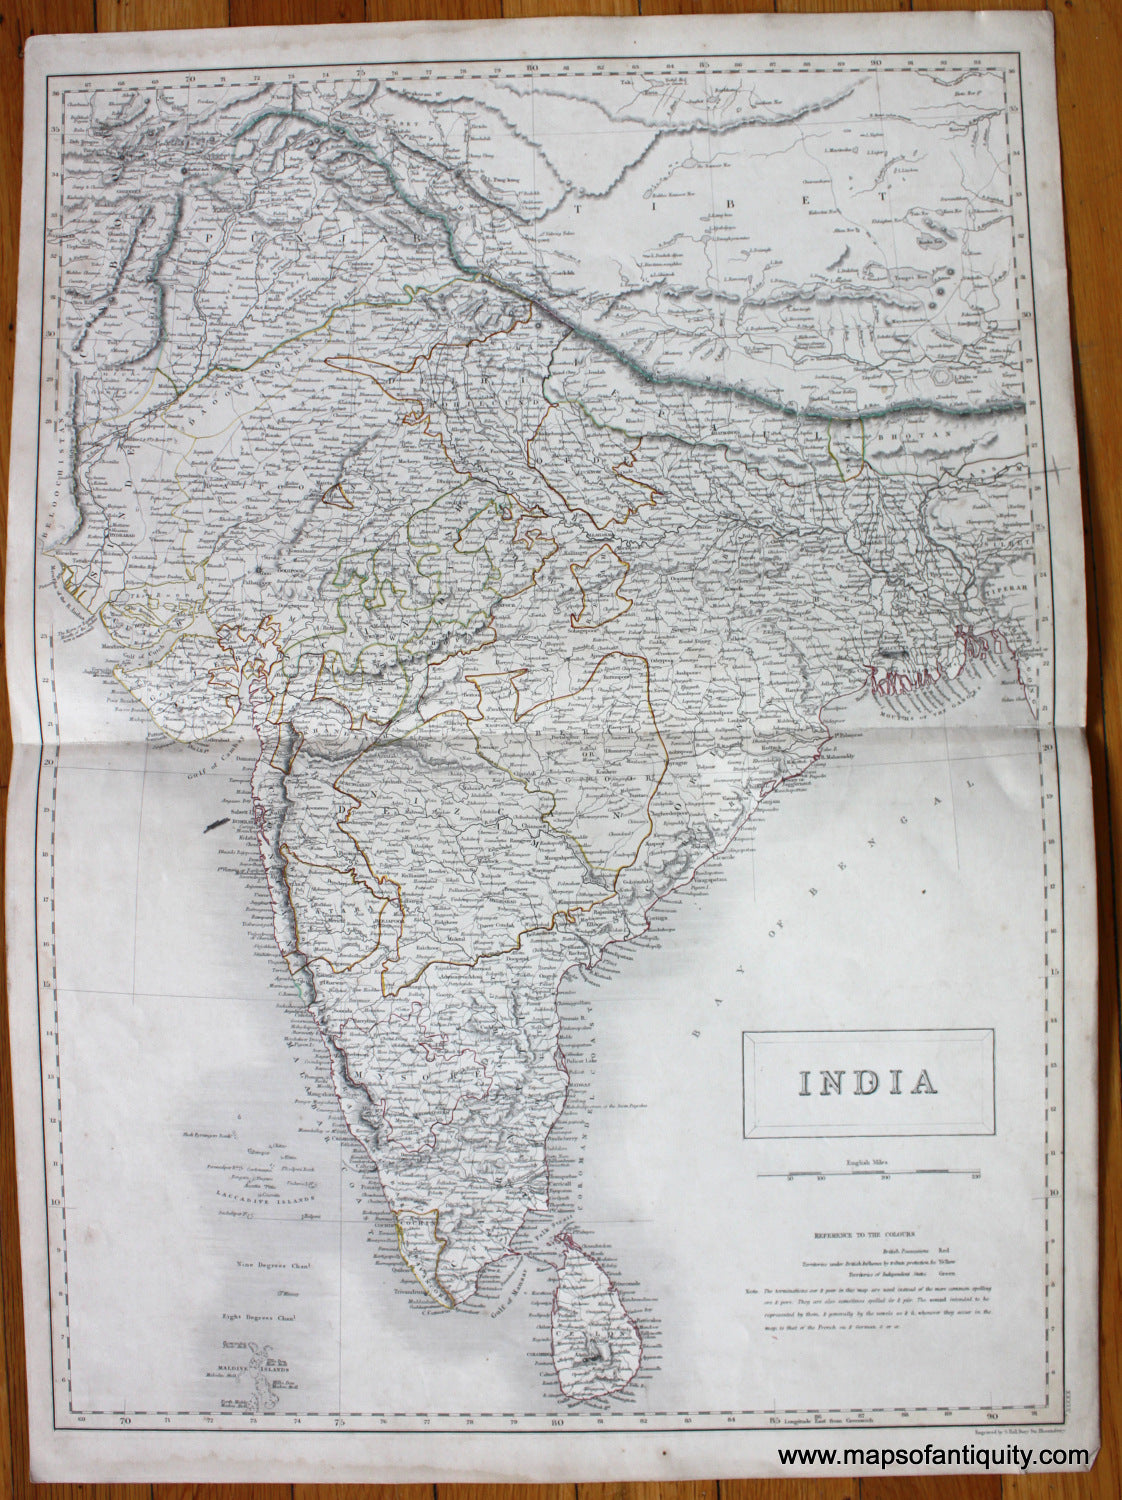 Antique-Hand-Colored-Map-India-Asia-India-1844-Black-Maps-Of-Antiquity